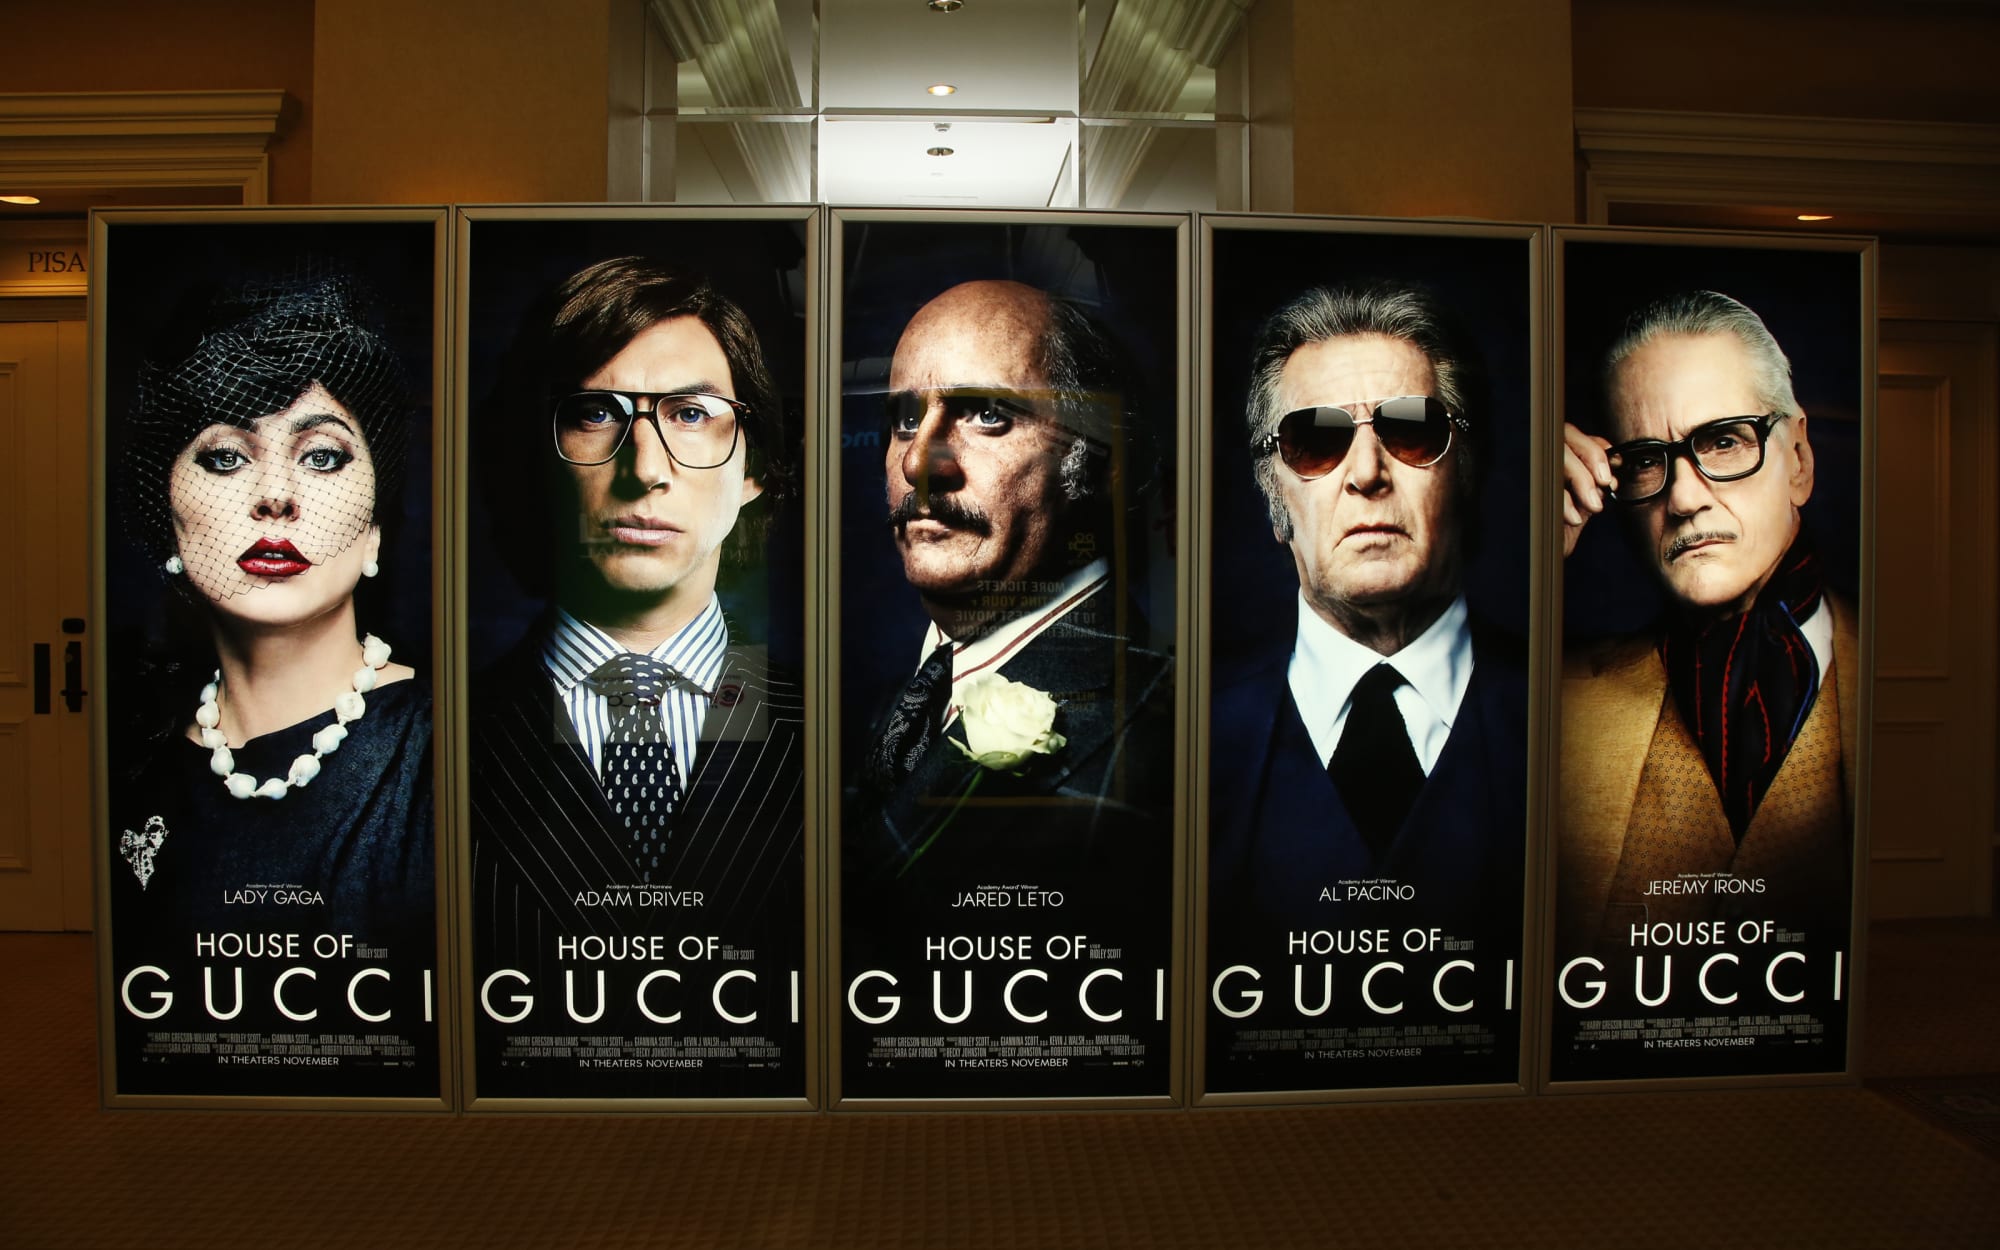 Is the House of Gucci movie going to stream on HBO Max?